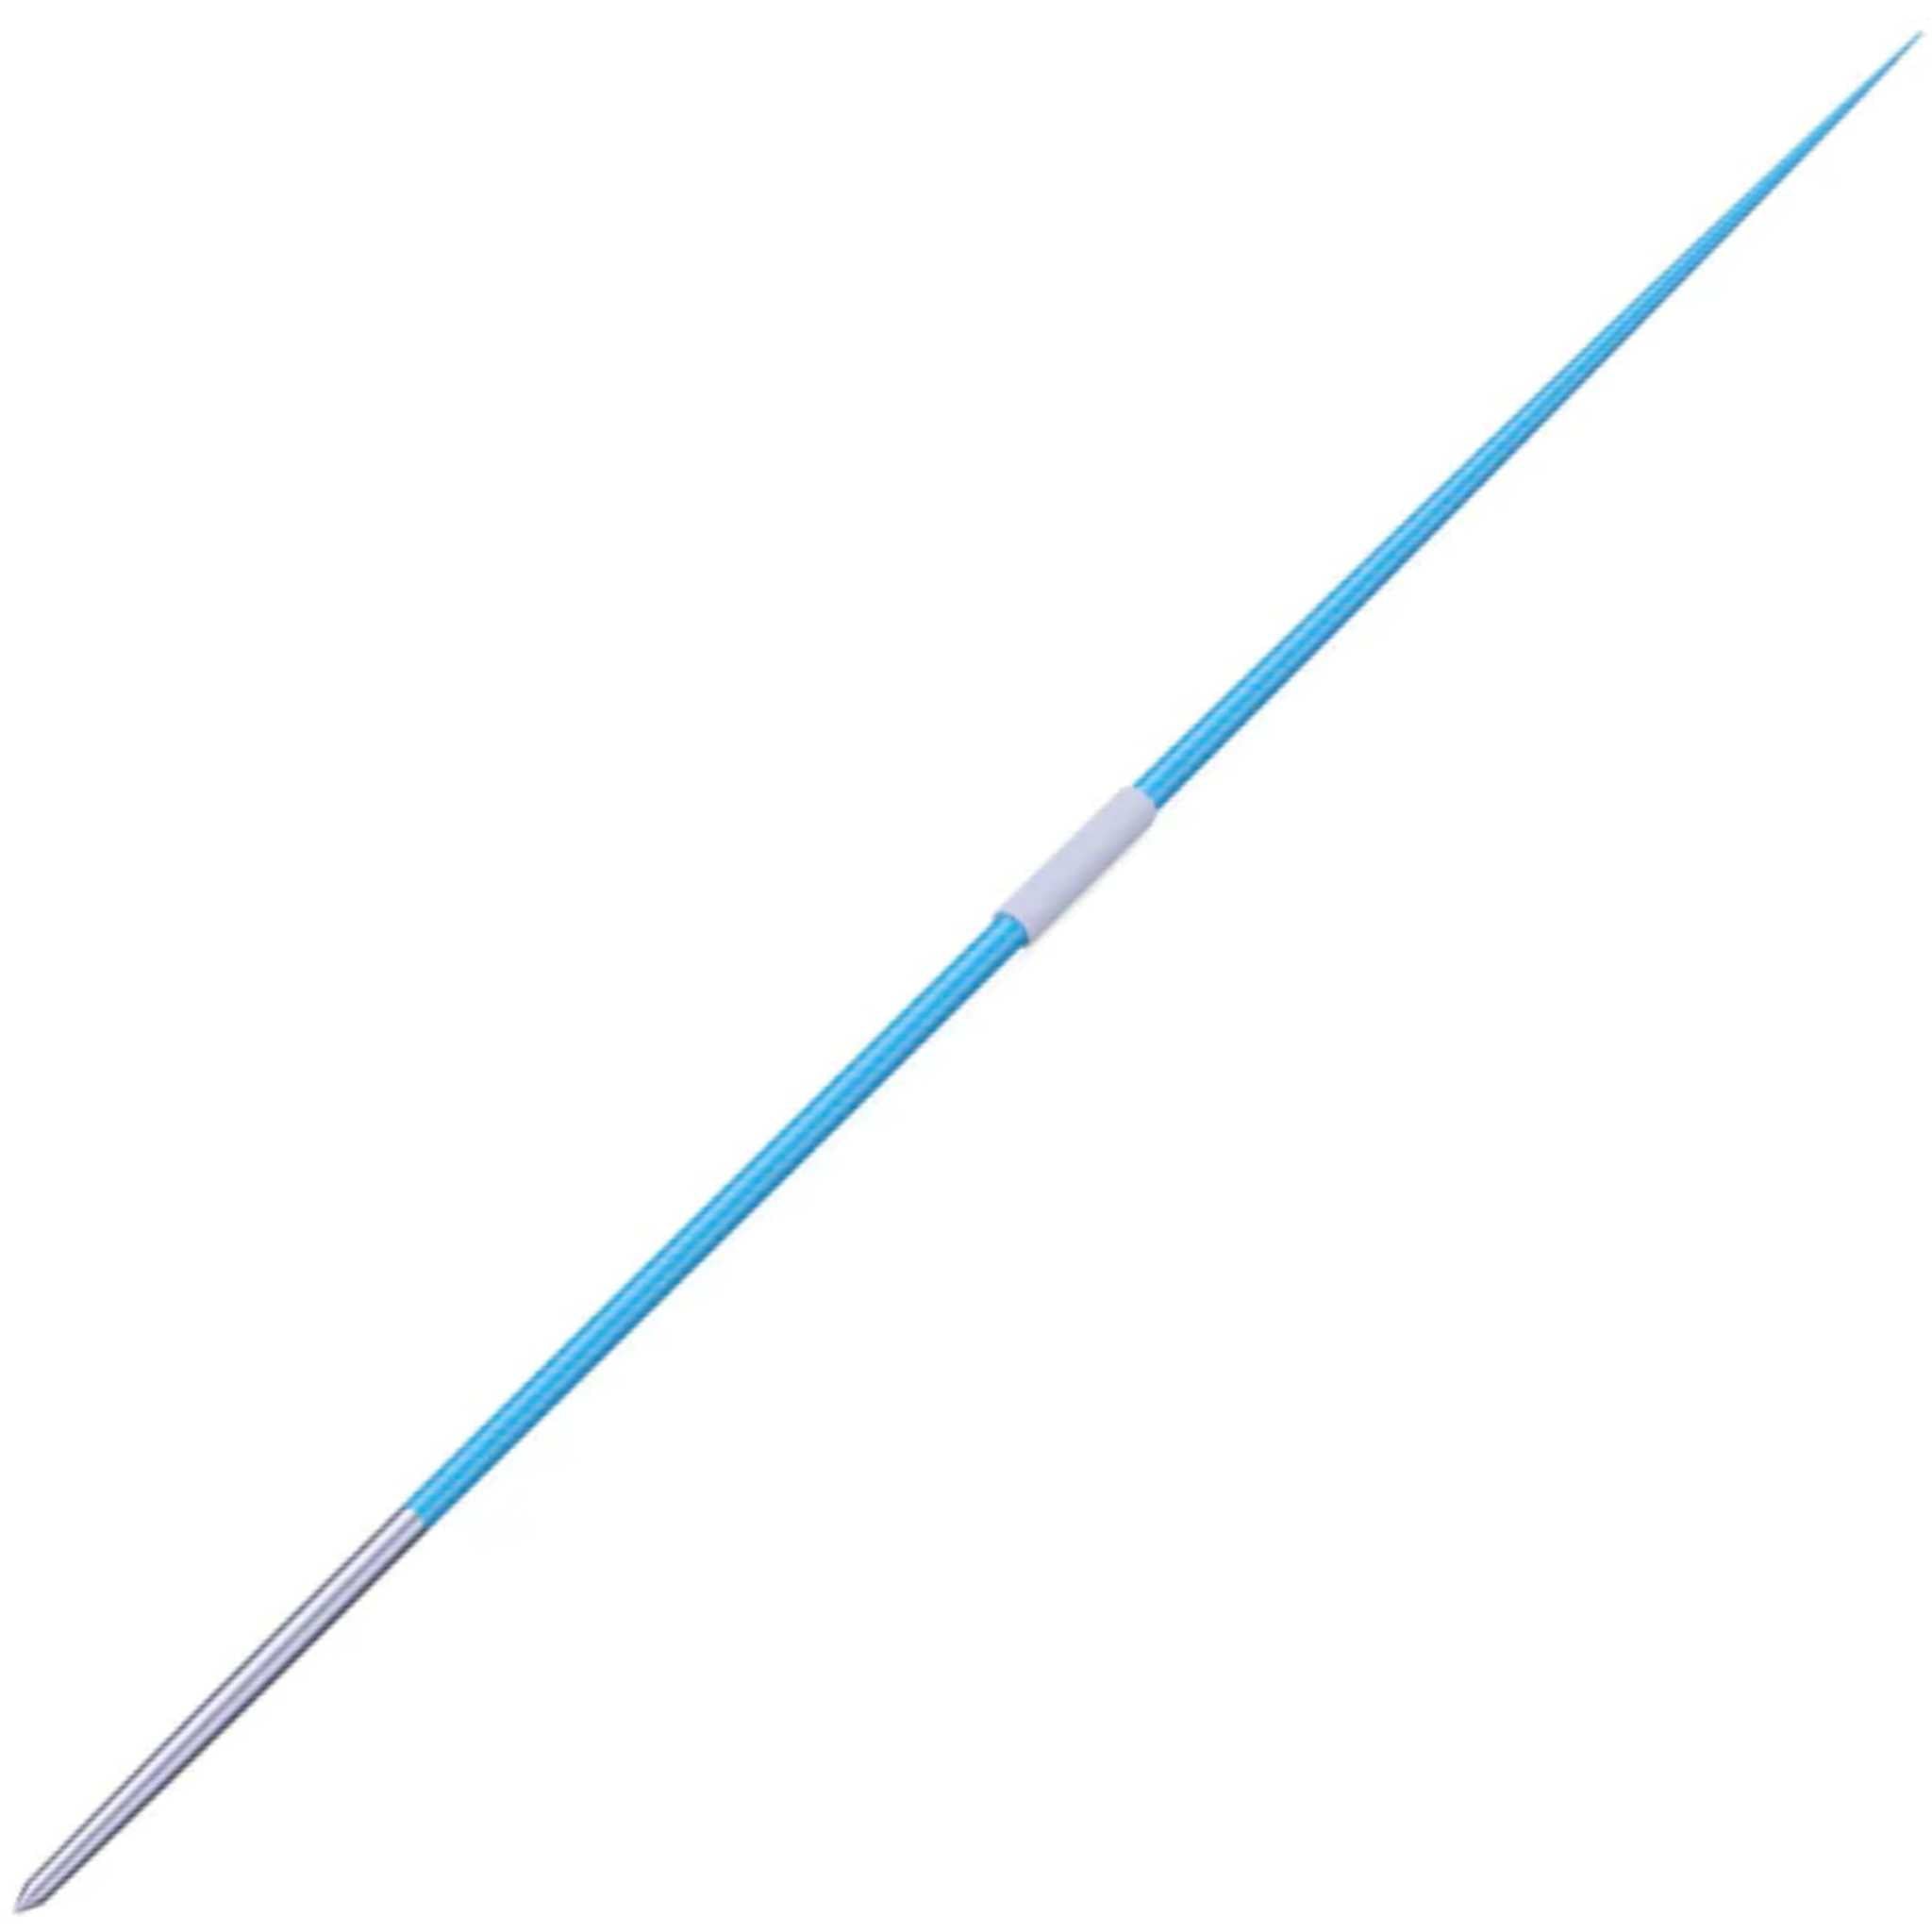 Nordic Master Aluminium Javelin | 700g | Pale blue with white grip cord